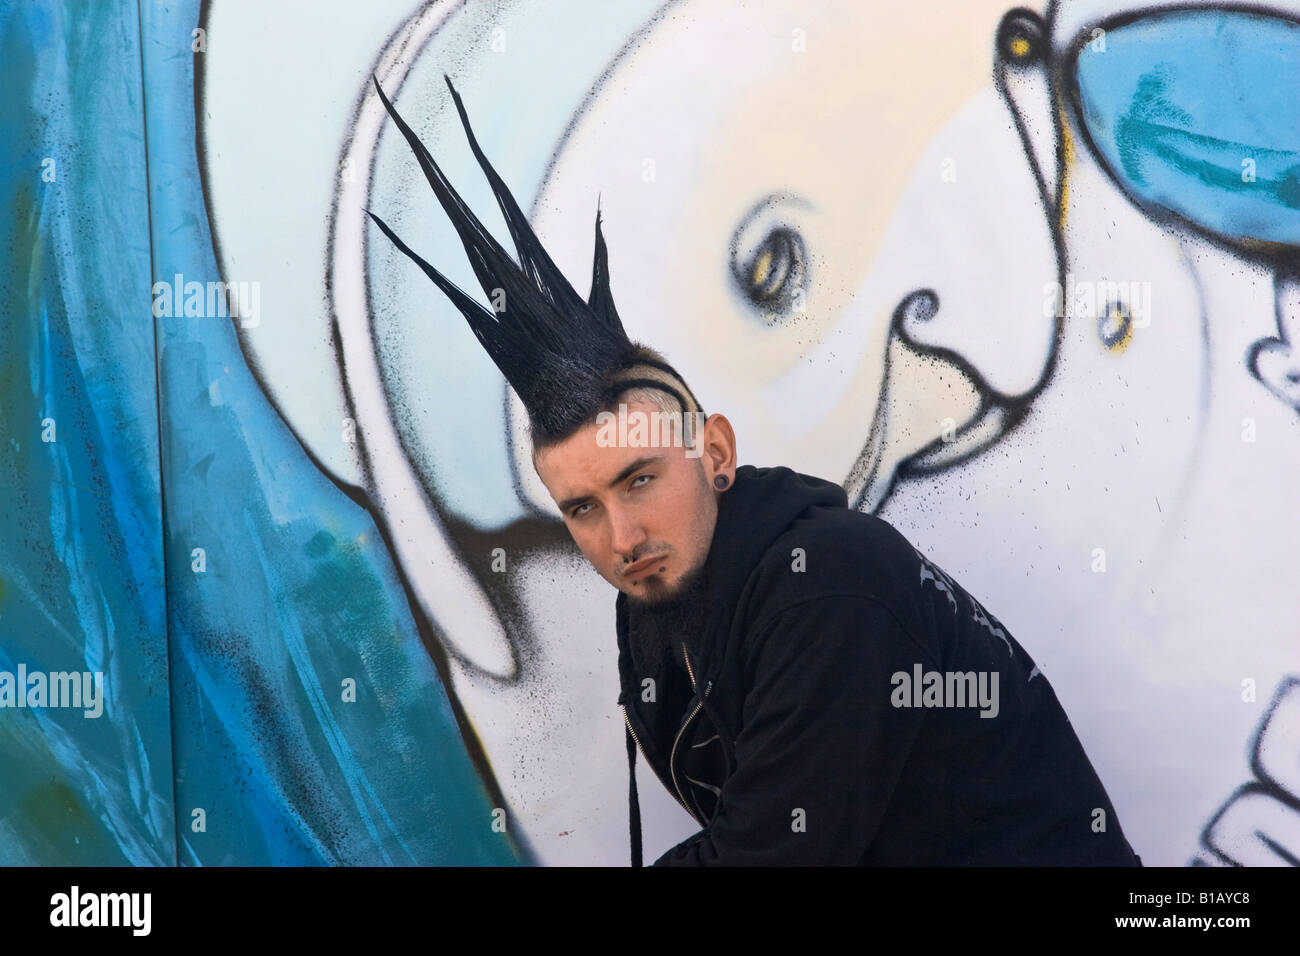 Punk teenager with spikey hairstyle kneeling by street art. Stock Photo